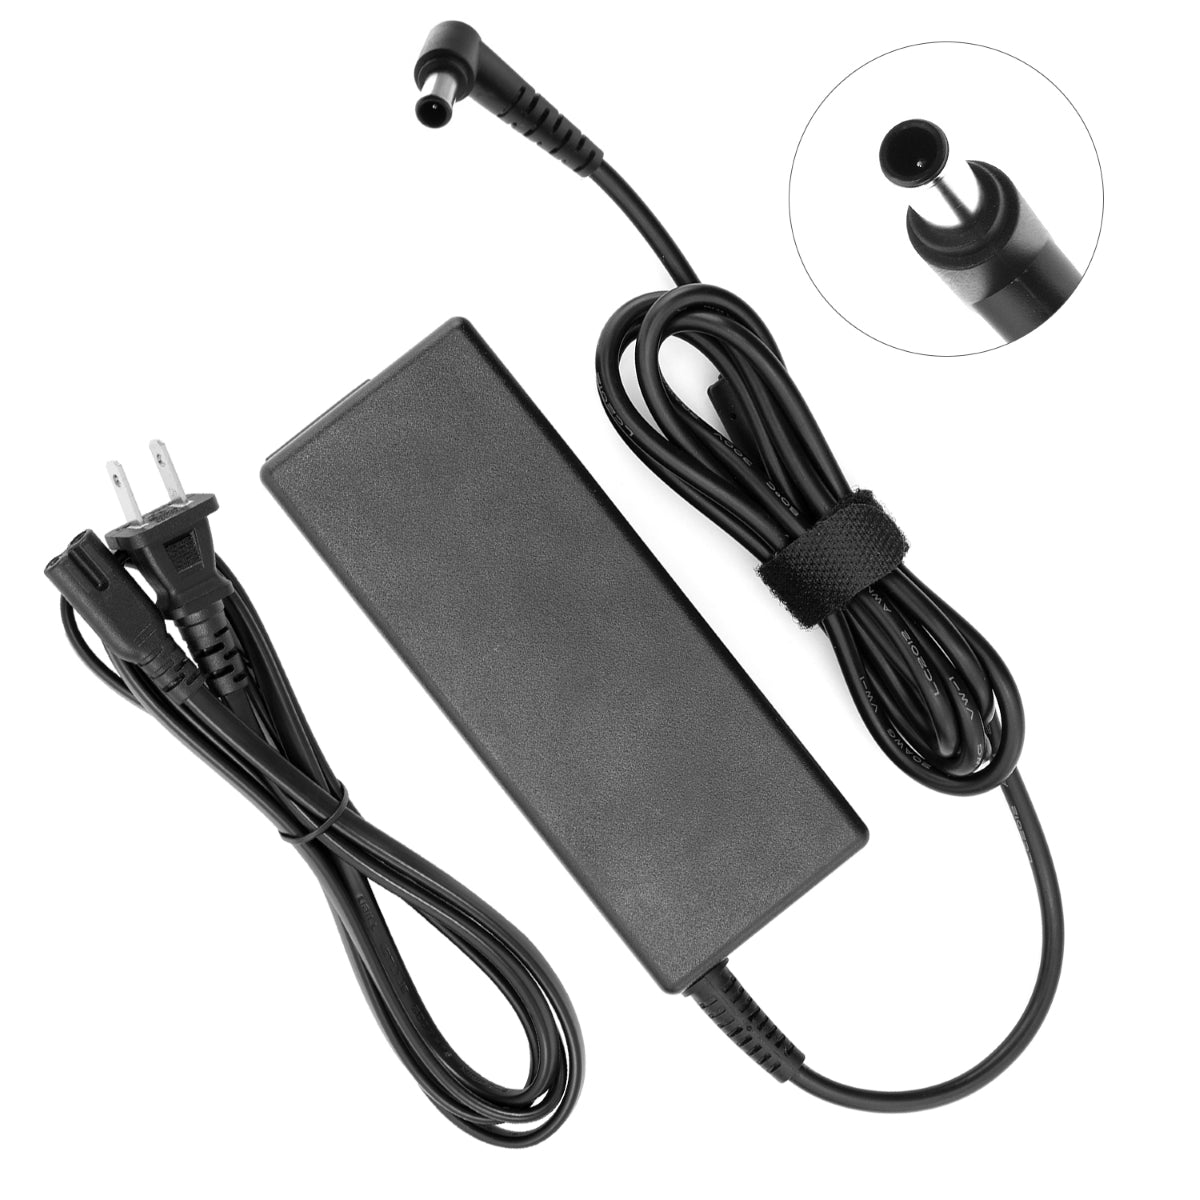 AC Adapter Power Supply for Samsung LT24C550ND Monitor